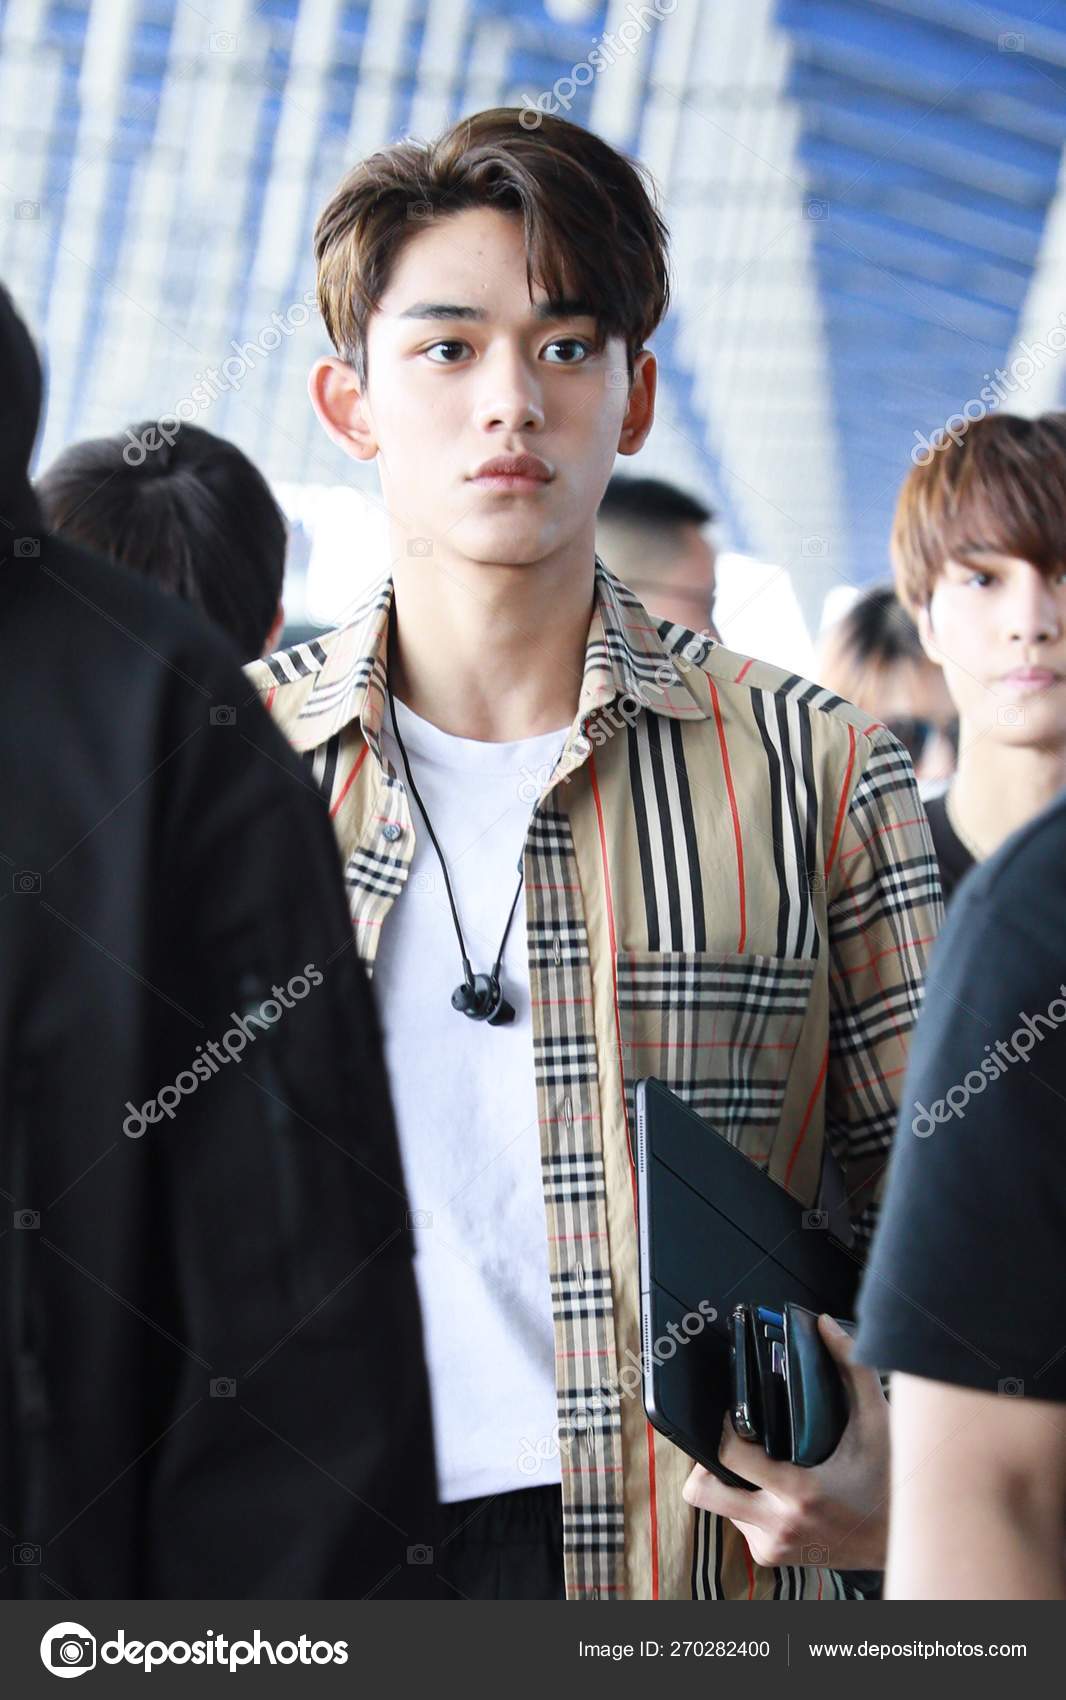 File:Lucas Wong at Incheon International Airport, South Korea, May 2019  01.png - Wikimedia Commons